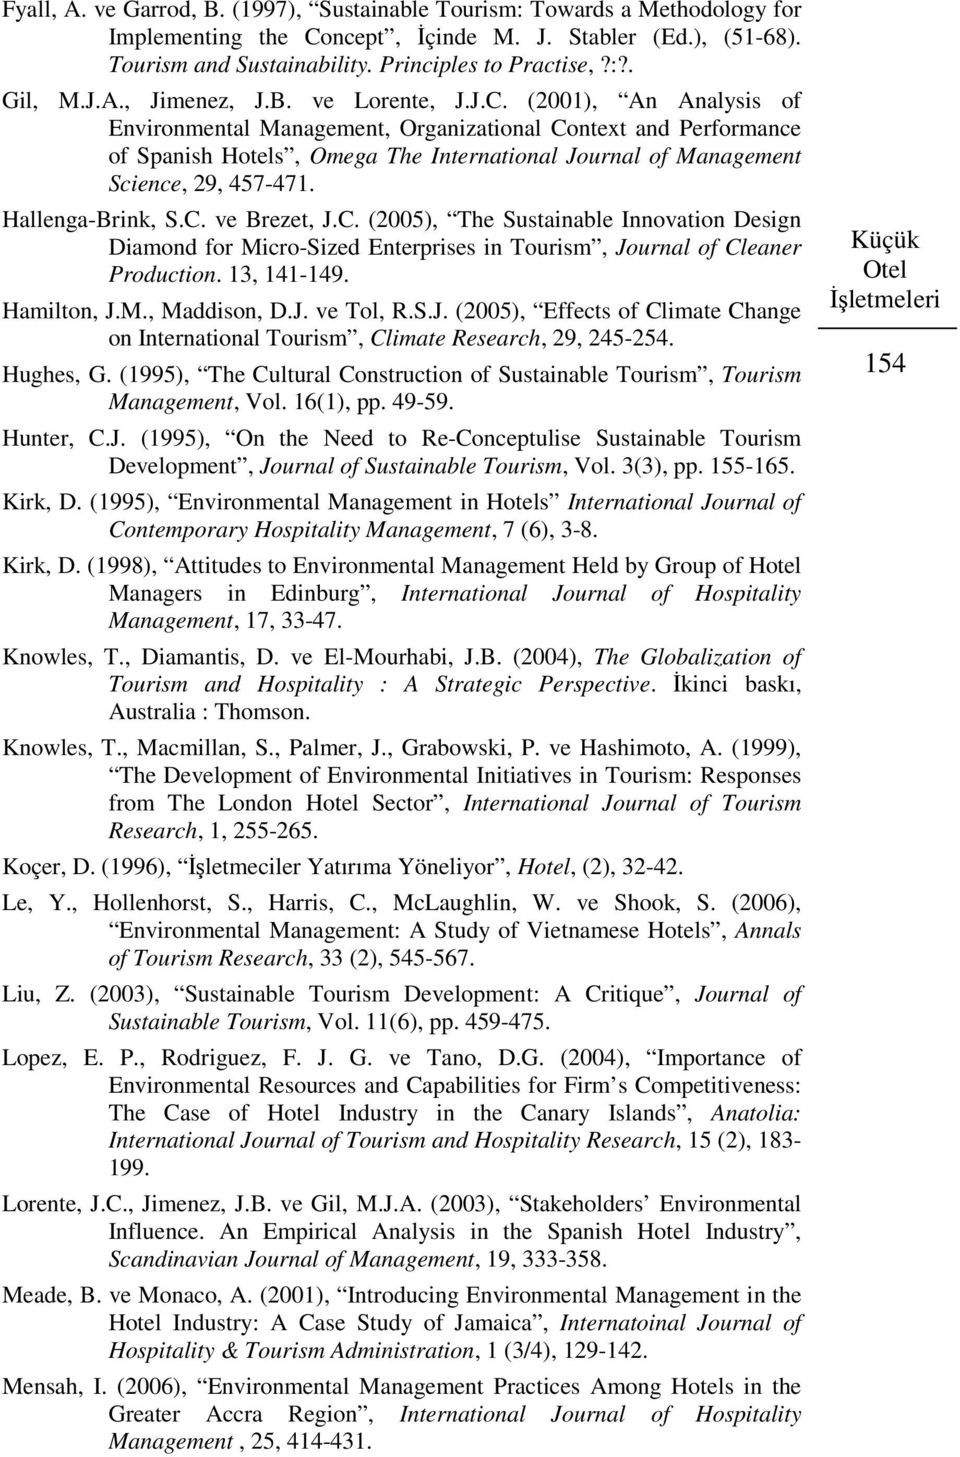 (2001), An Analysis of Environmental Management, Organizational Context and Performance of Spanish Hotels, Omega The International Journal of Management Science, 29, 457-471. Hallenga-Brink, S.C. ve Brezet, J.